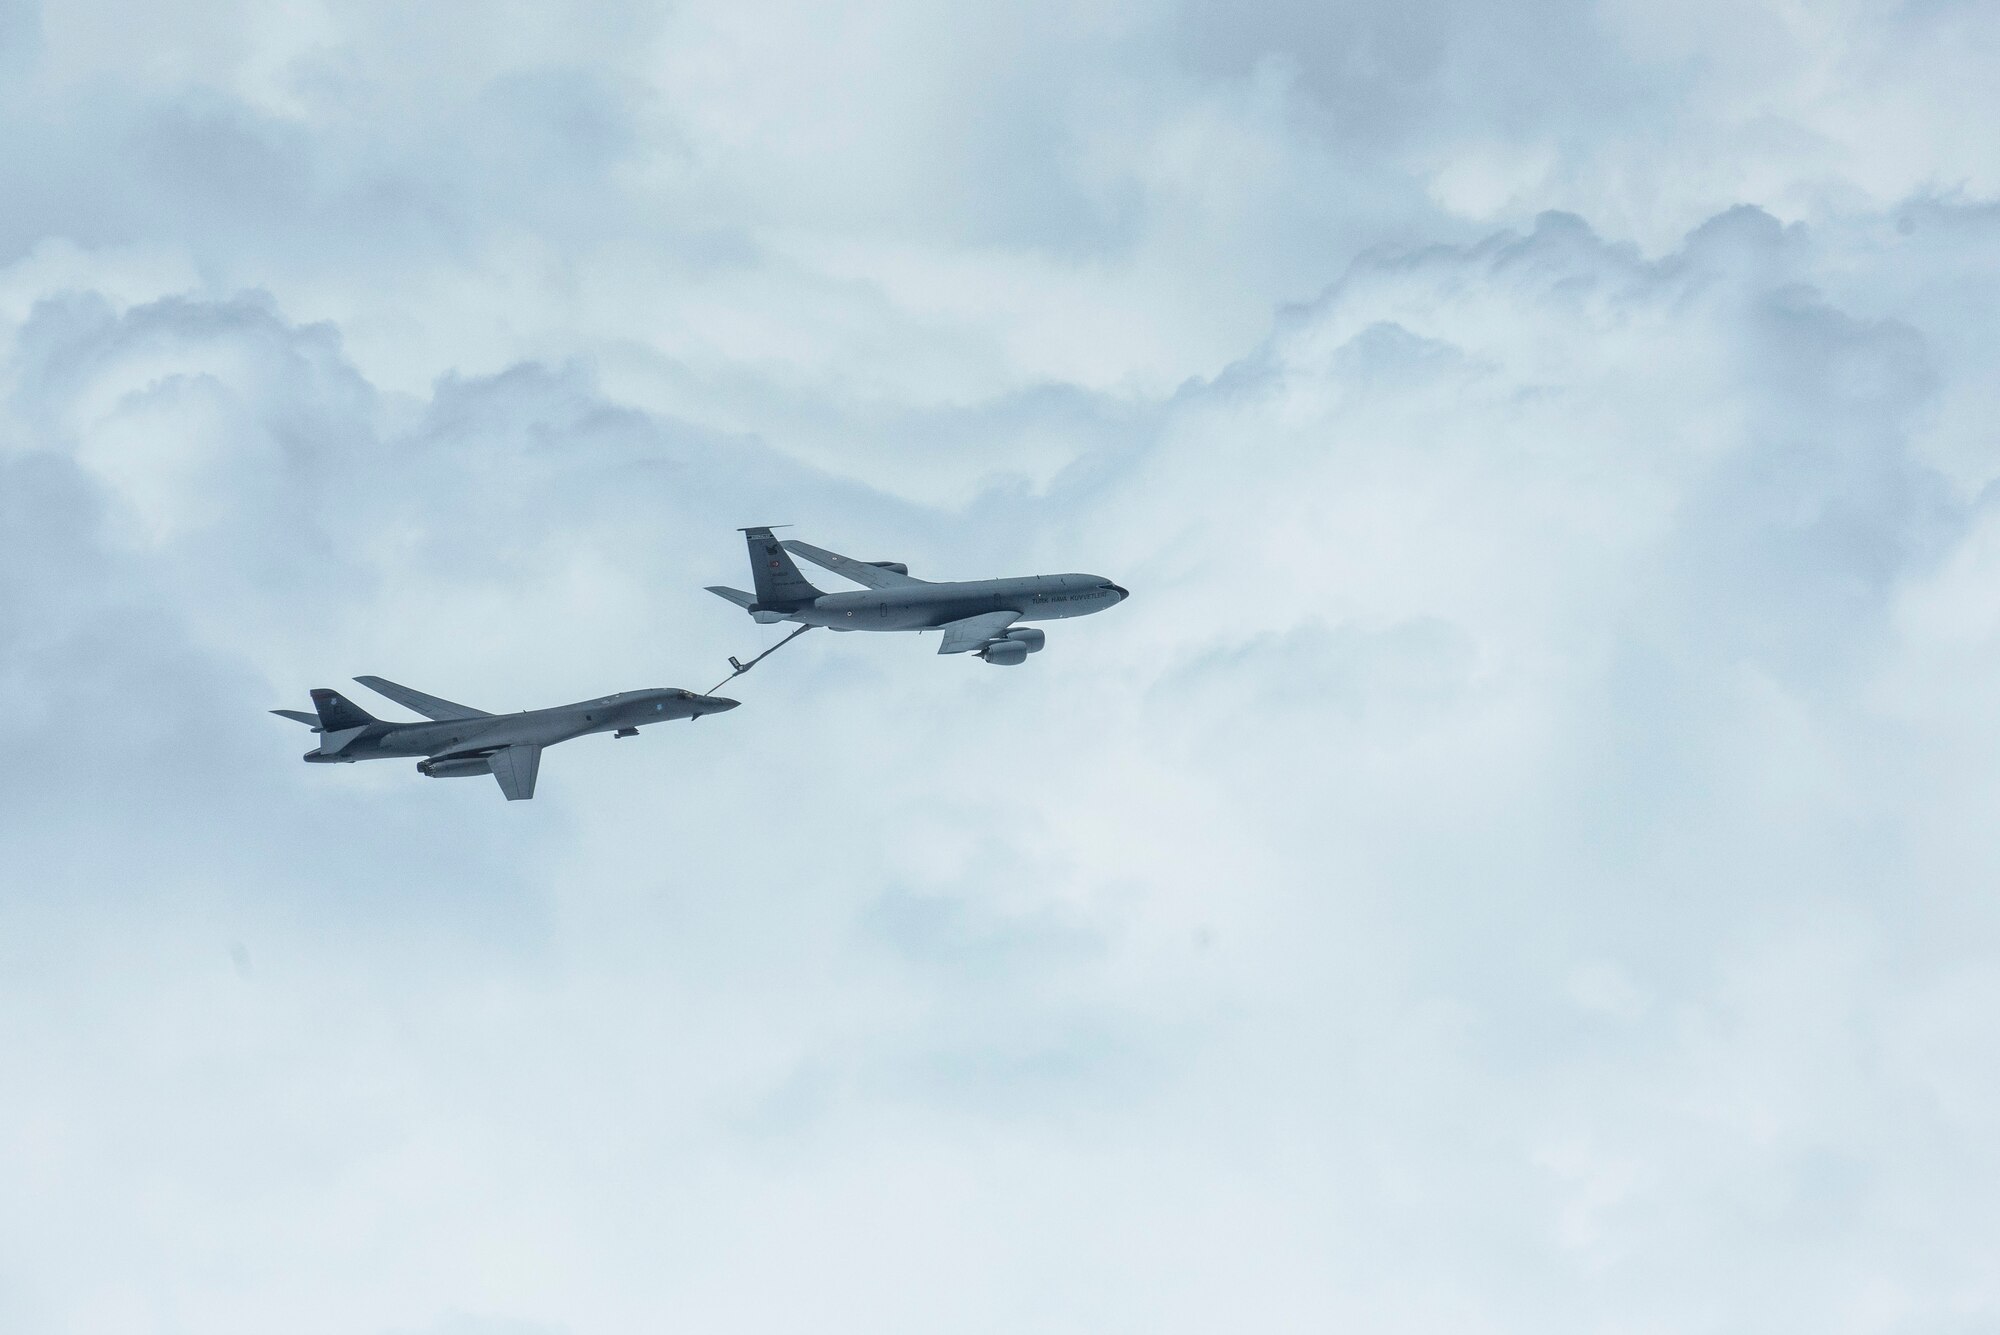 A B-1B Lancer assigned to the 28th Bomb Wing, Ellsworth Force Base, South Dakota, receives fuel from a Turkish air force KC-135 Stratotanker during a Bomber Task Force mission over the Black Sea May 29, 2020. Bomber missions enable crews to maintain a high state of readiness and proficiency, and validate our always-ready global strike capability. (U.S. Air Force photo by Staff Sgt. Joshua Magbanua)